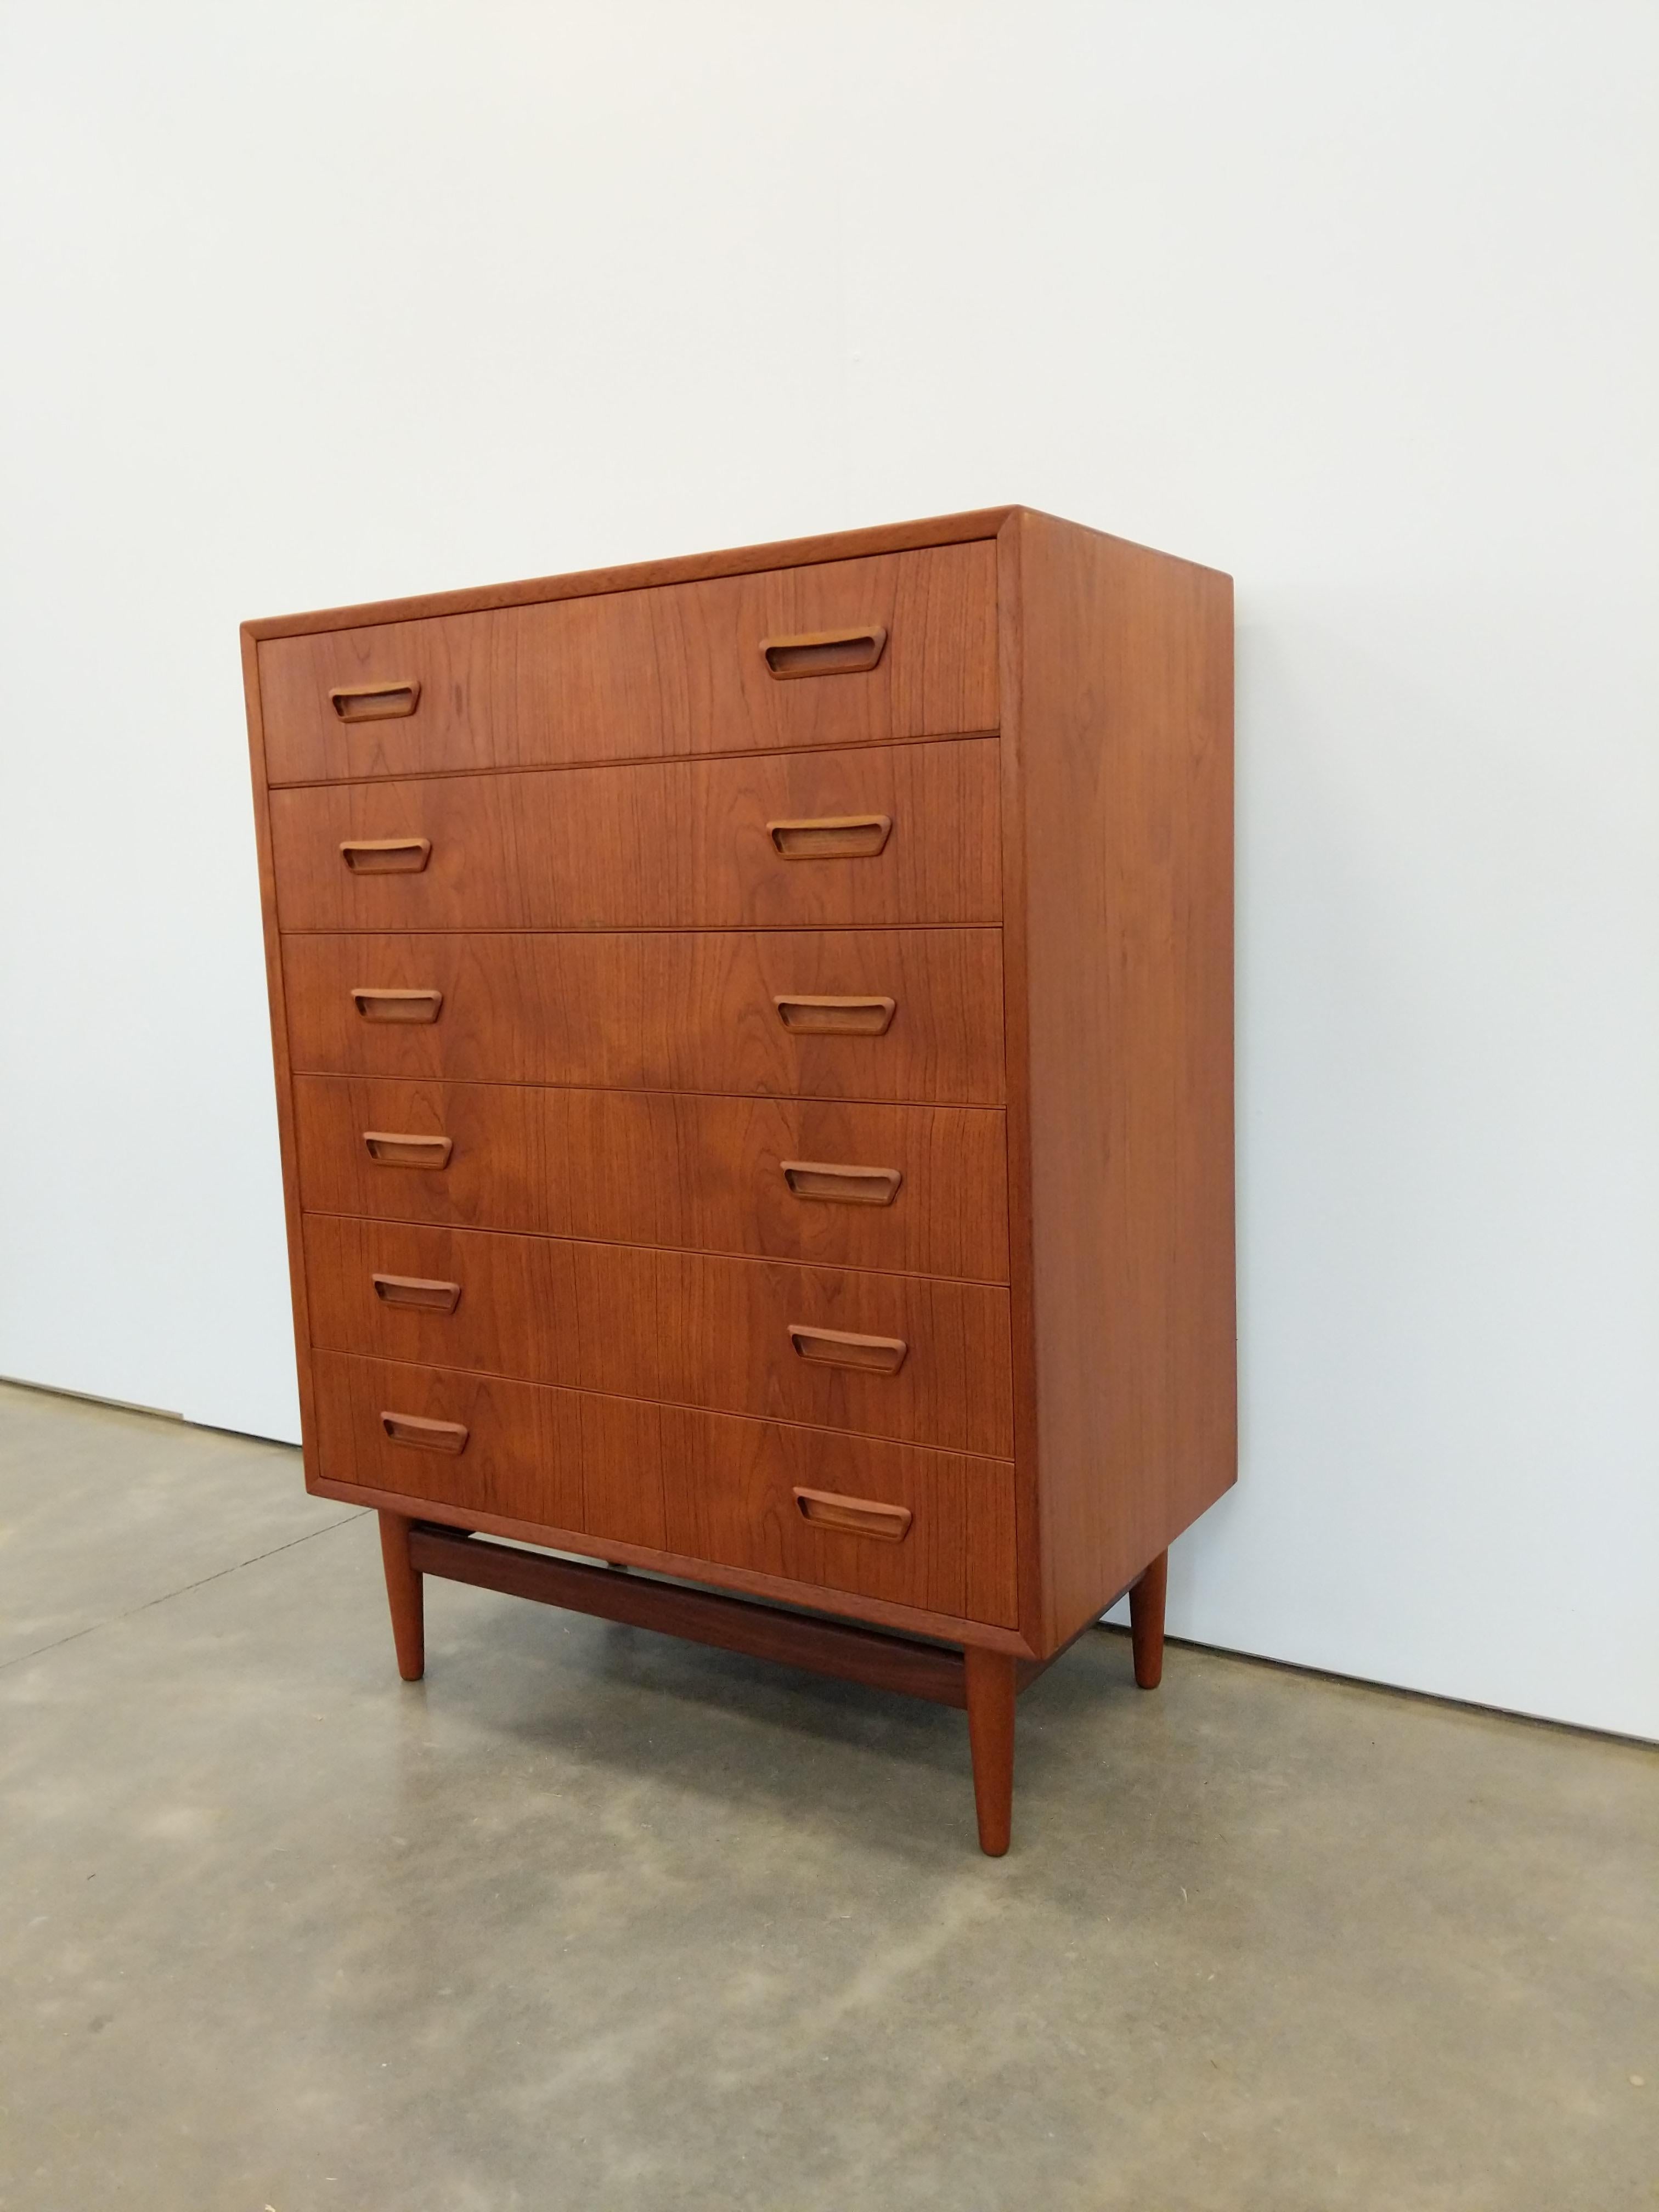 Authentic vintage mid century Danish / Scandinavian Modern teak dresser / chest of drawers.

This piece is in excellent refinished condition with few signs of age-related wear (see photos).

If you would like any additional details, please contact